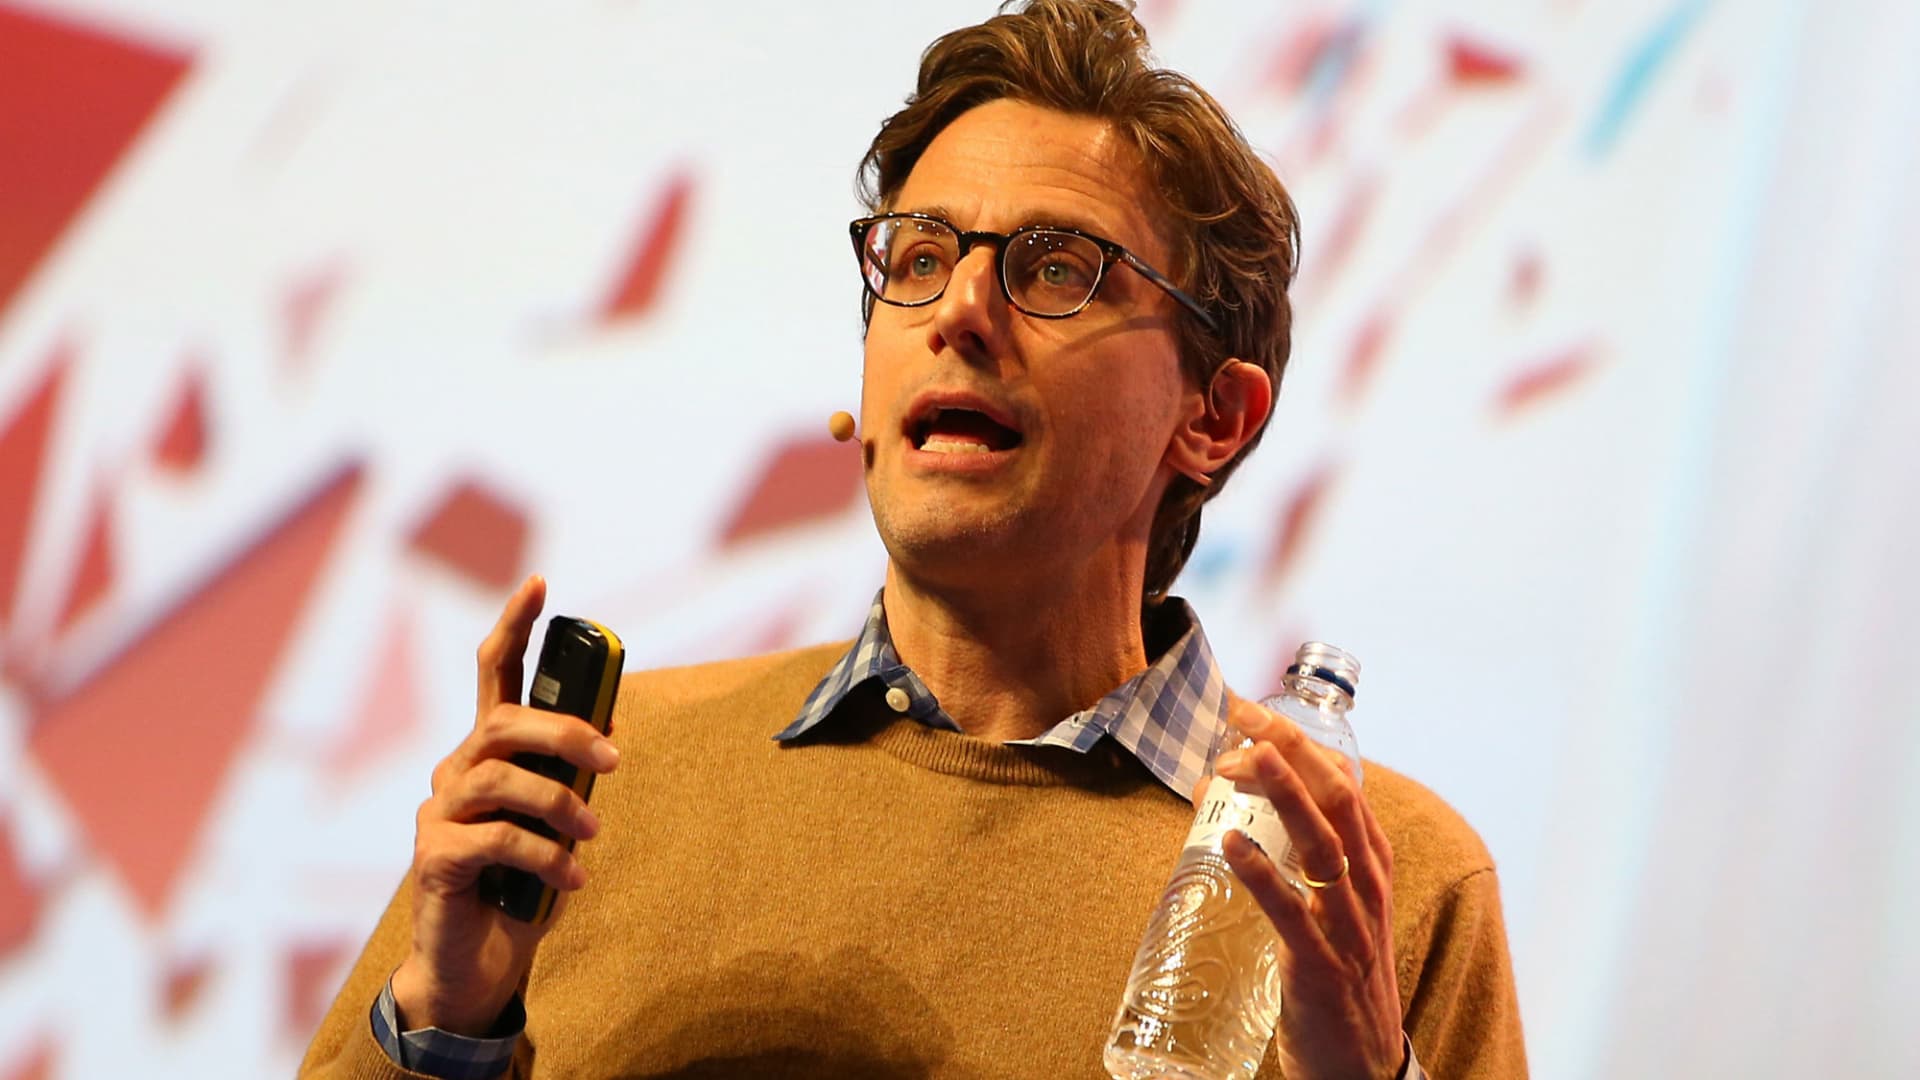 BuzzFeed investors have pushed CEO Jonah Peretti to shut down newsroom